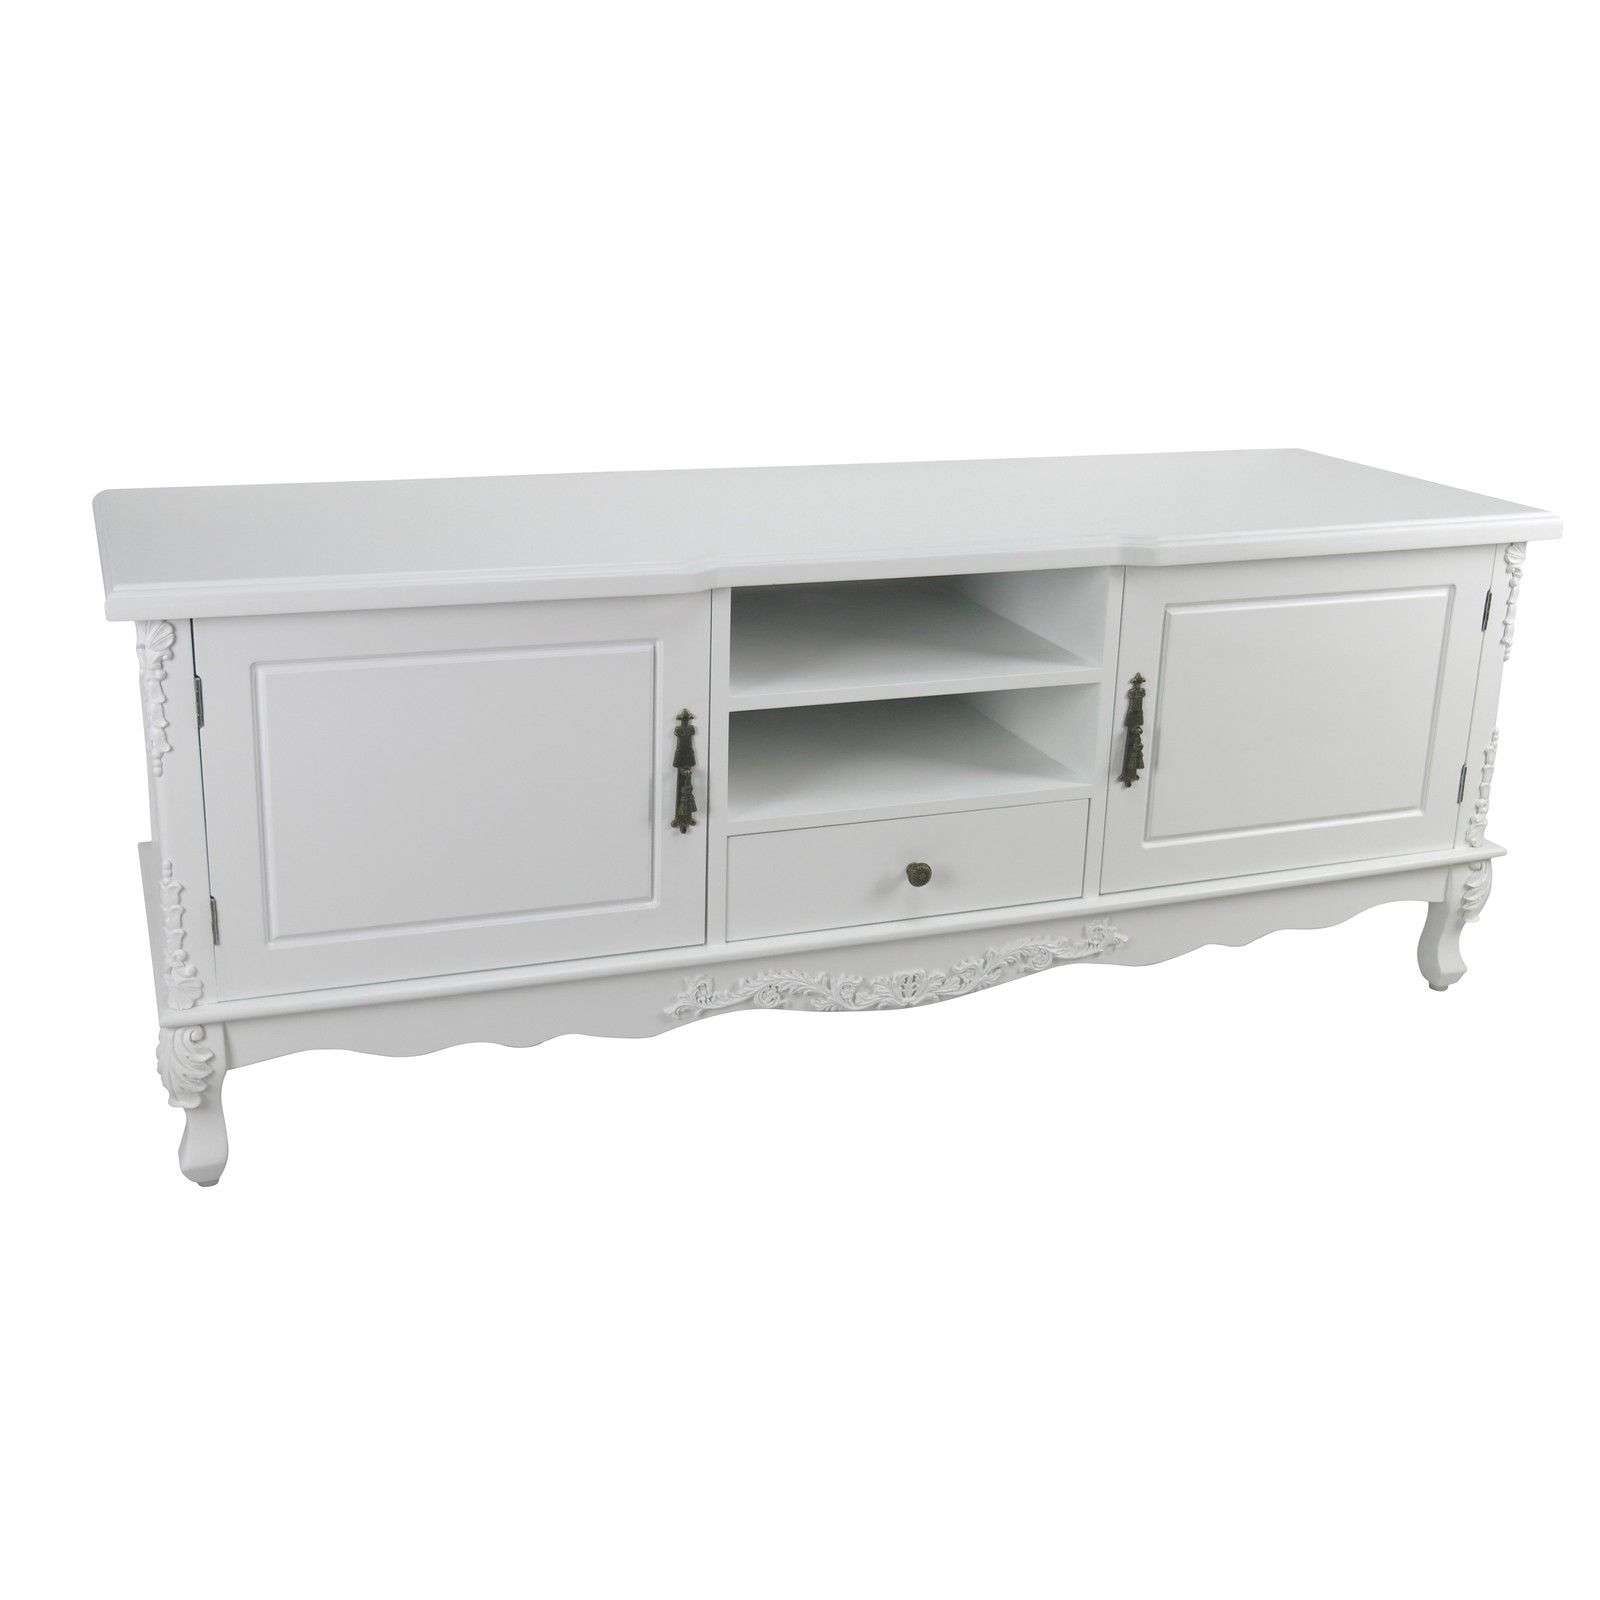 French Style White Large Cabinet Tv Unit Furniture – La Maison Within French Tv Cabinets (View 16 of 20)